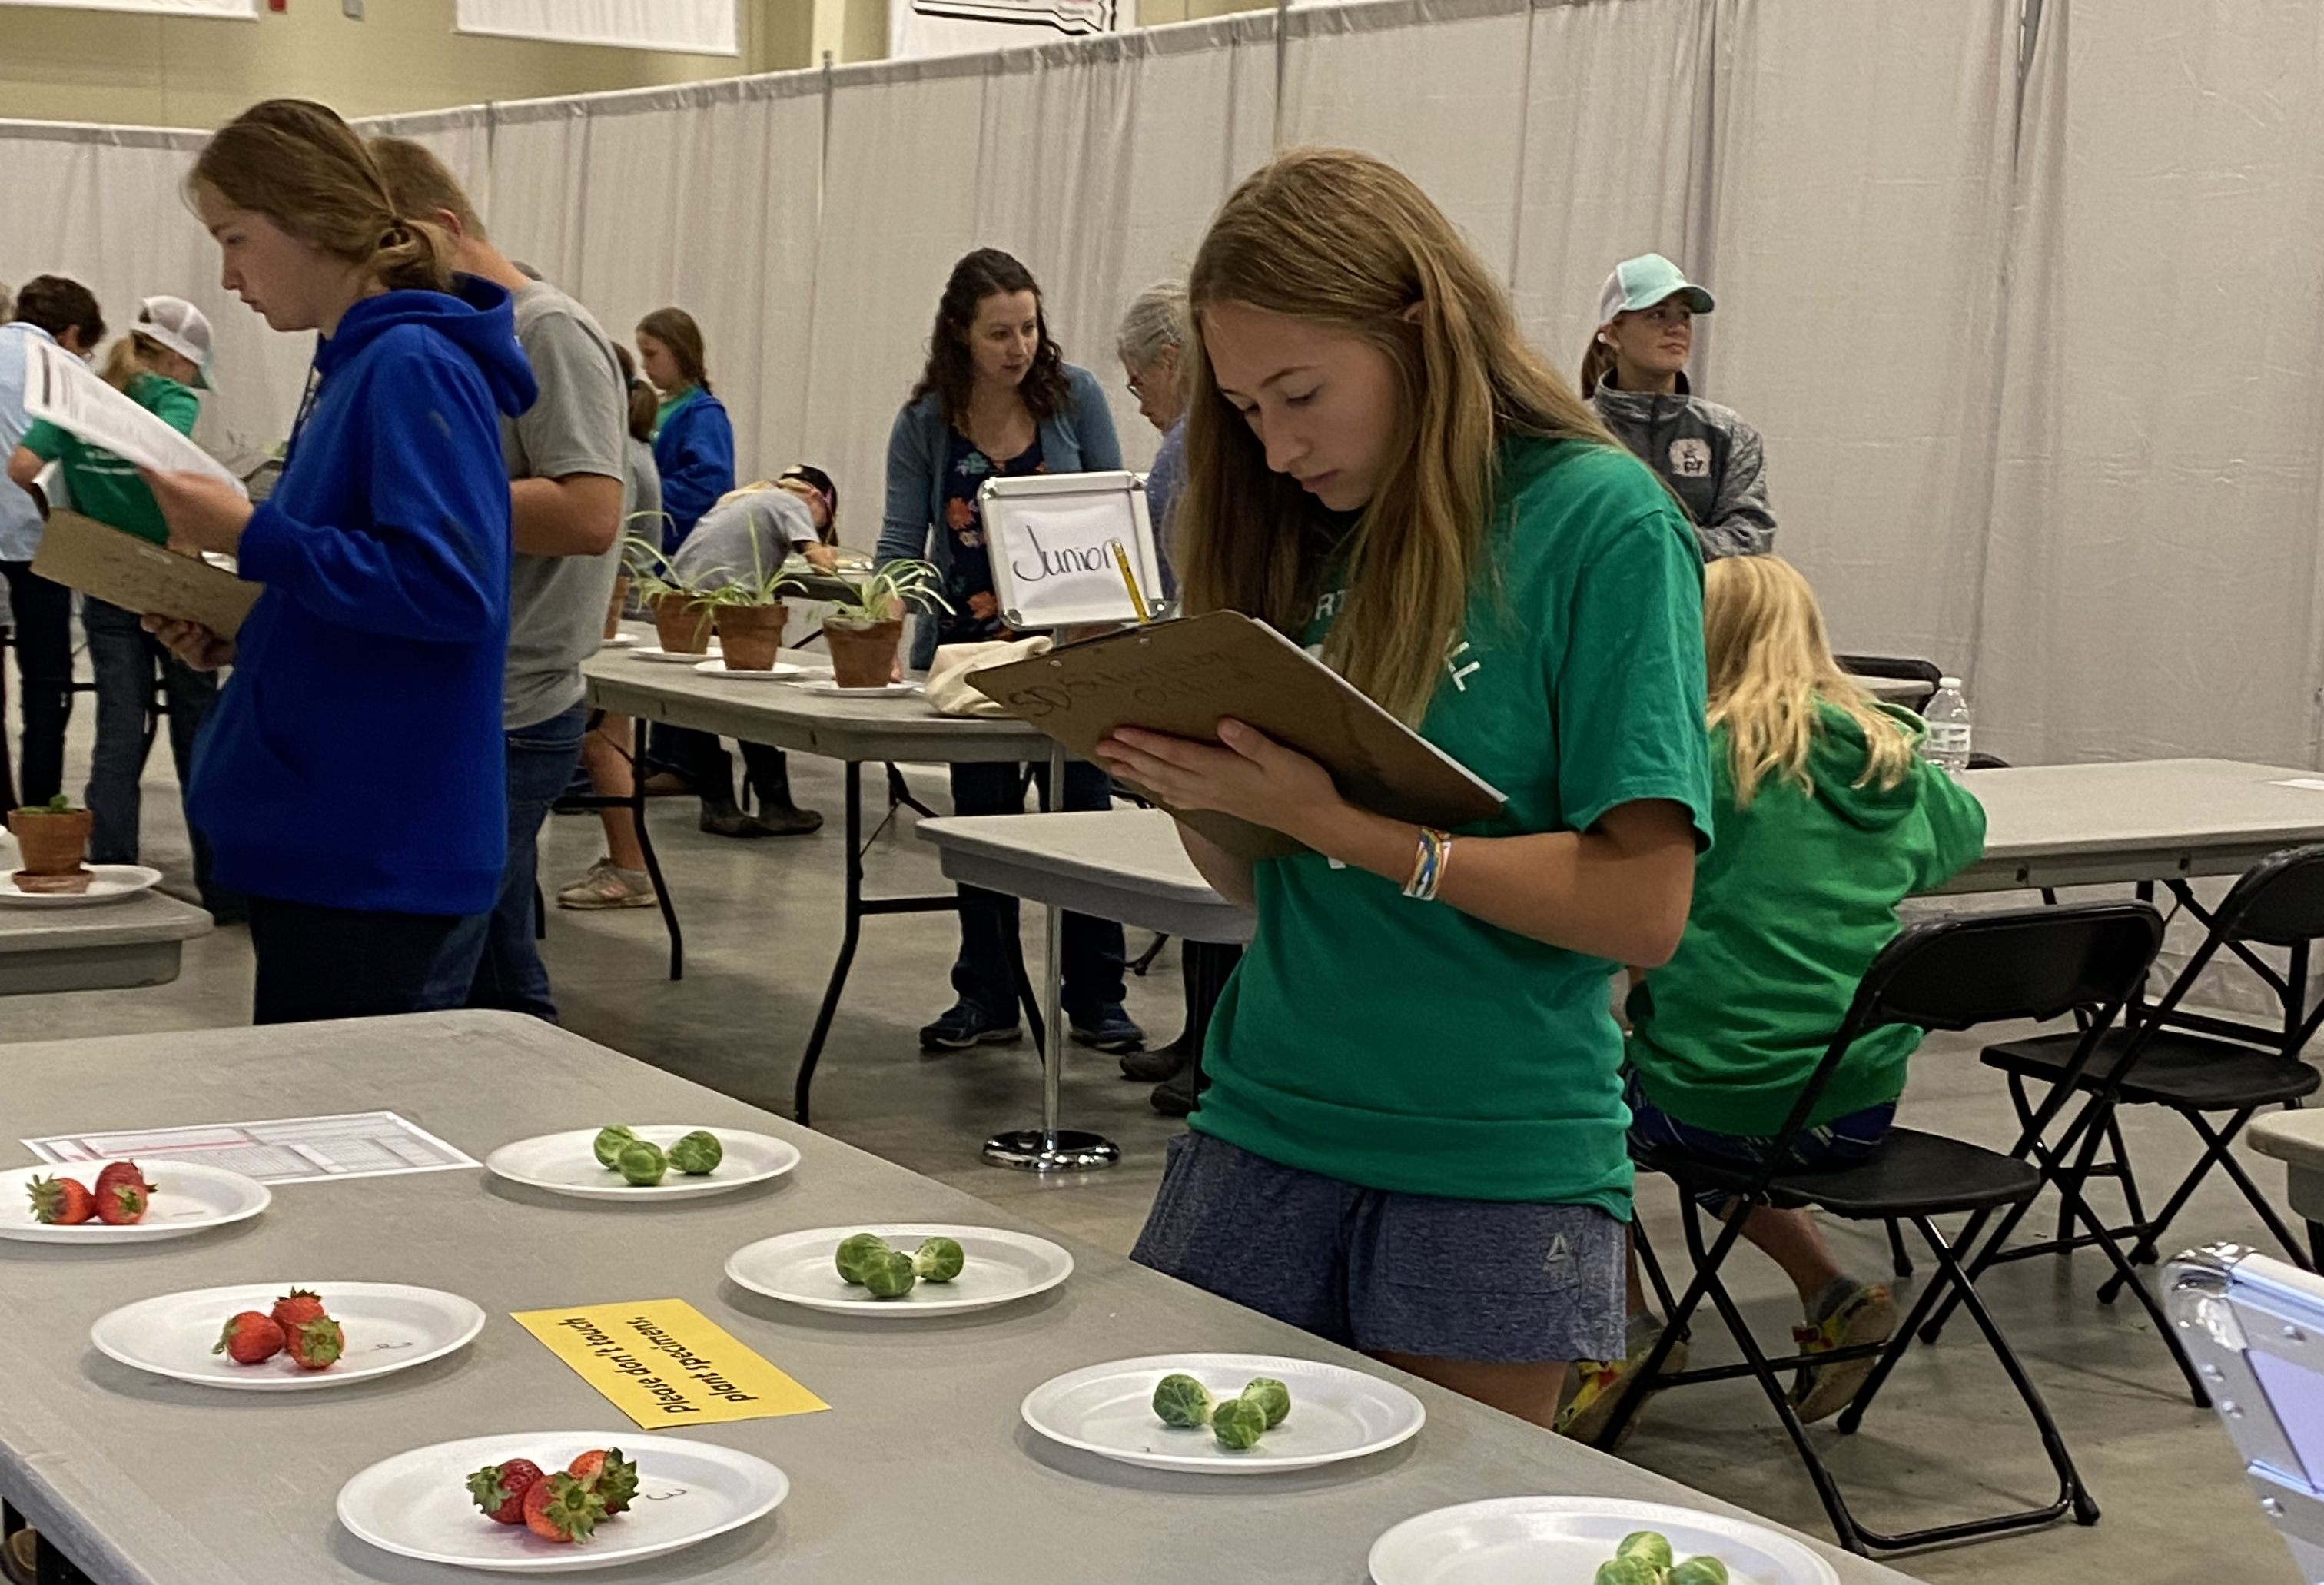 Youth judging fruits, vegetable and plants